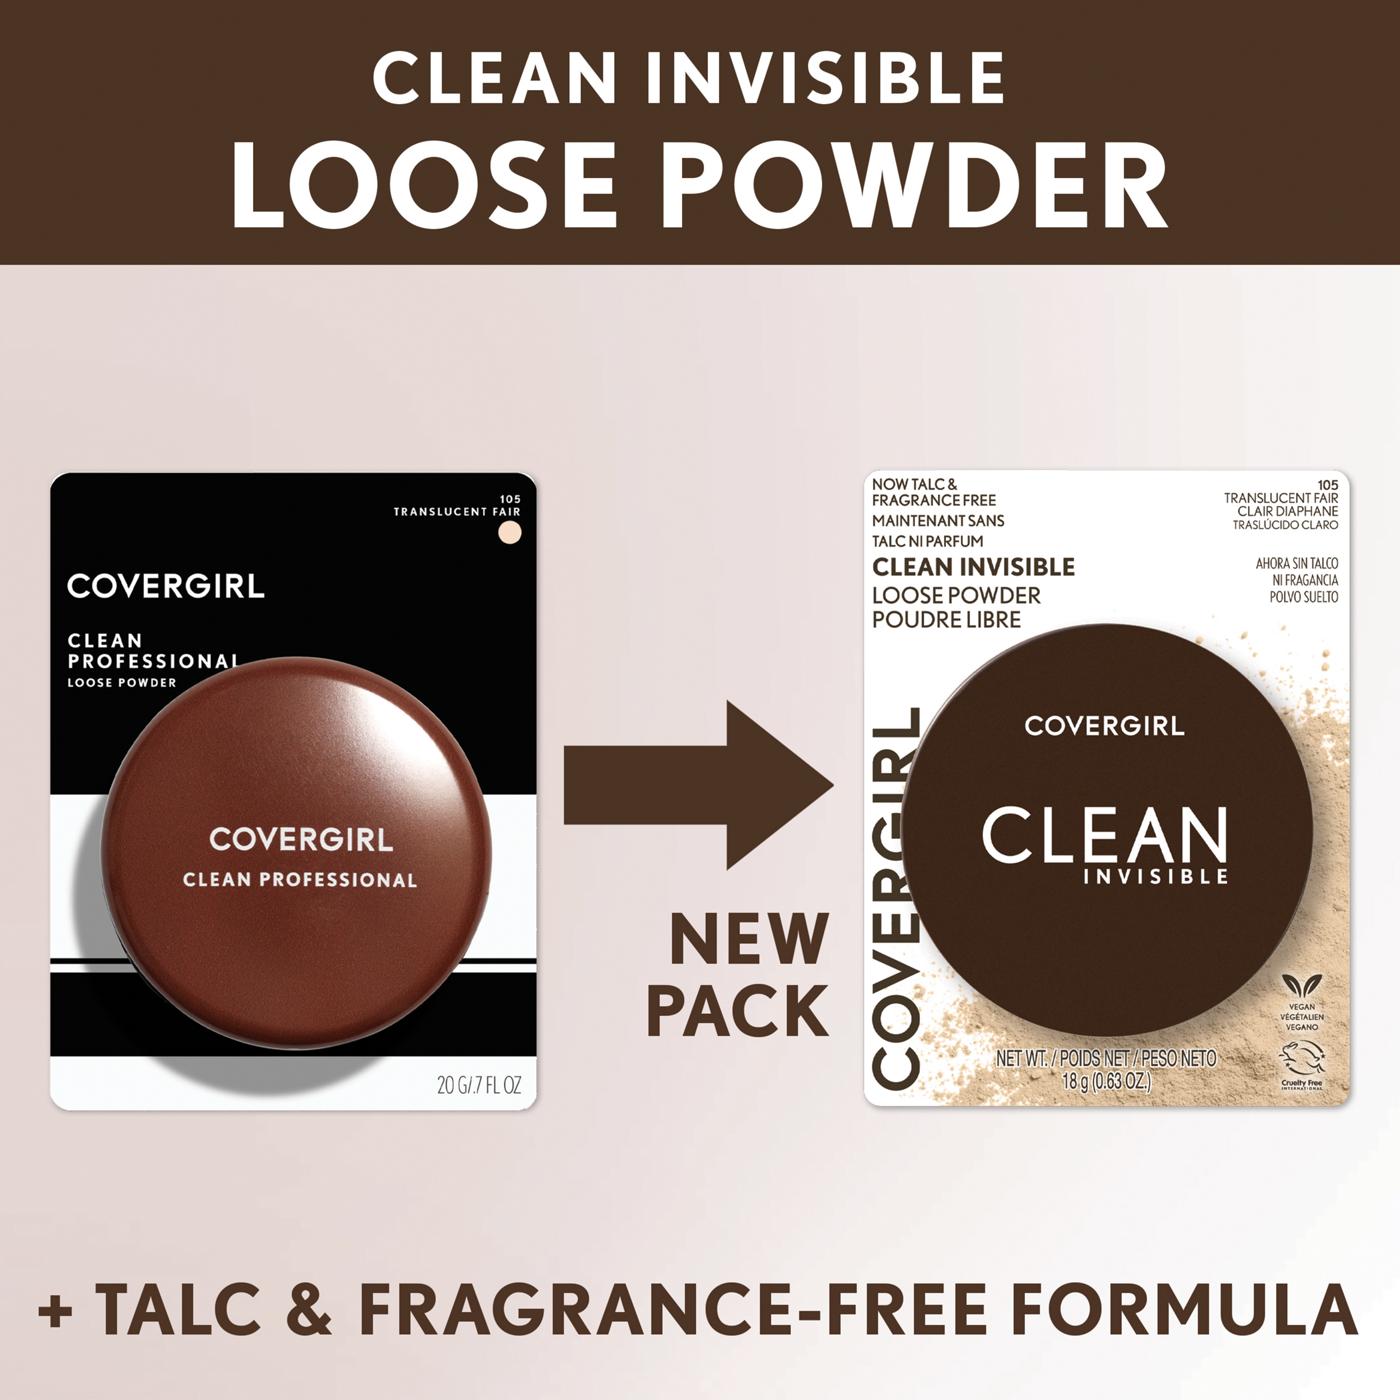 Covergirl Clean Invisible Loose Powder - Translucent Fair; image 5 of 13